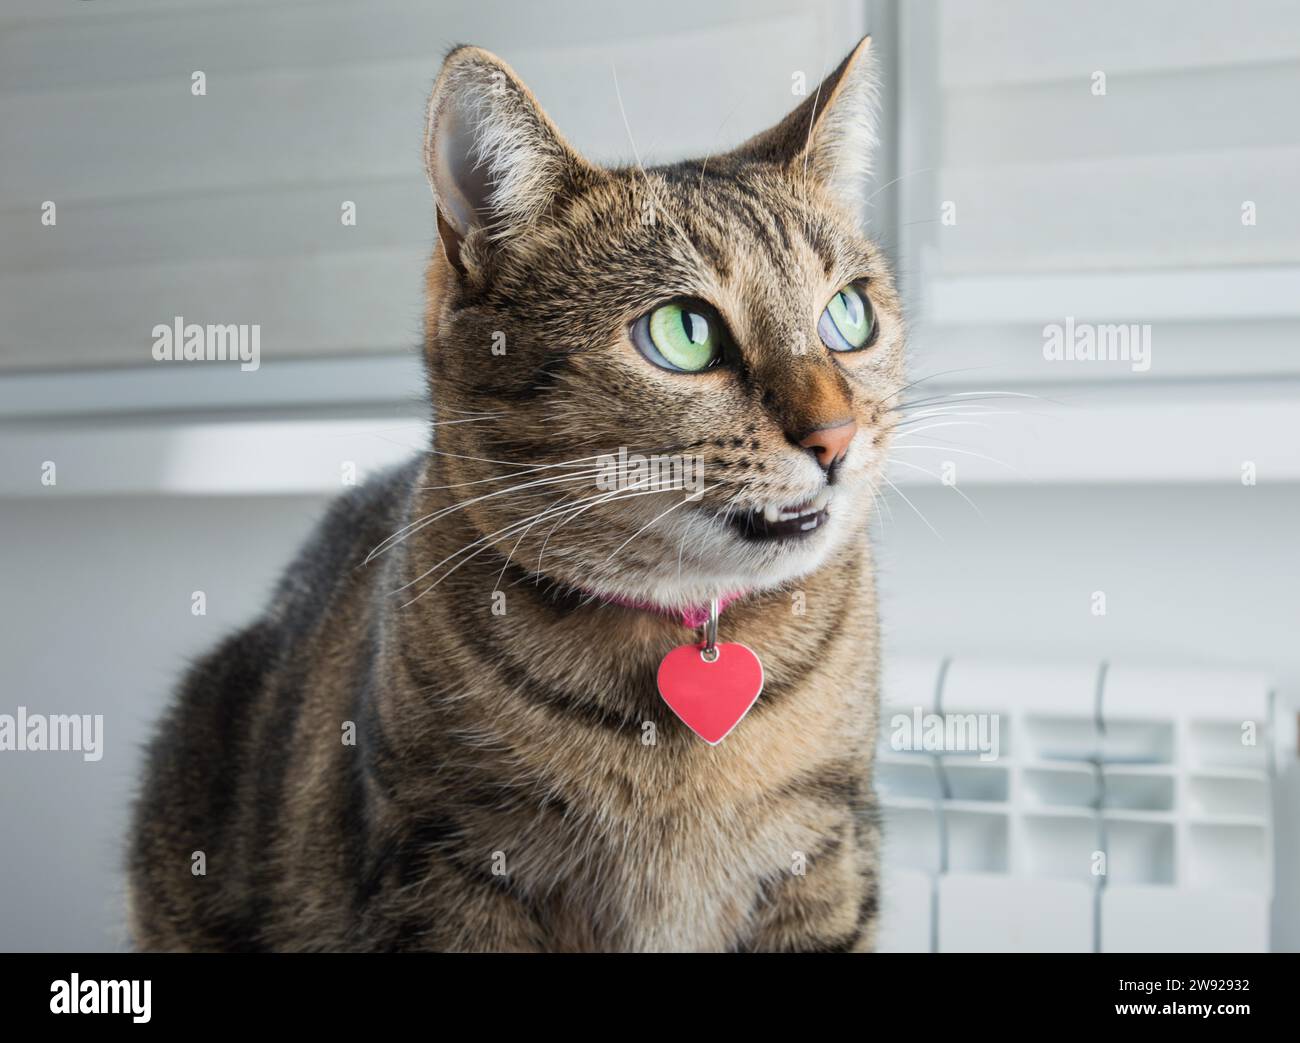 Cunning Bengal cat with a pink collar is grinning intriguingly. Mixed media Stock Photo